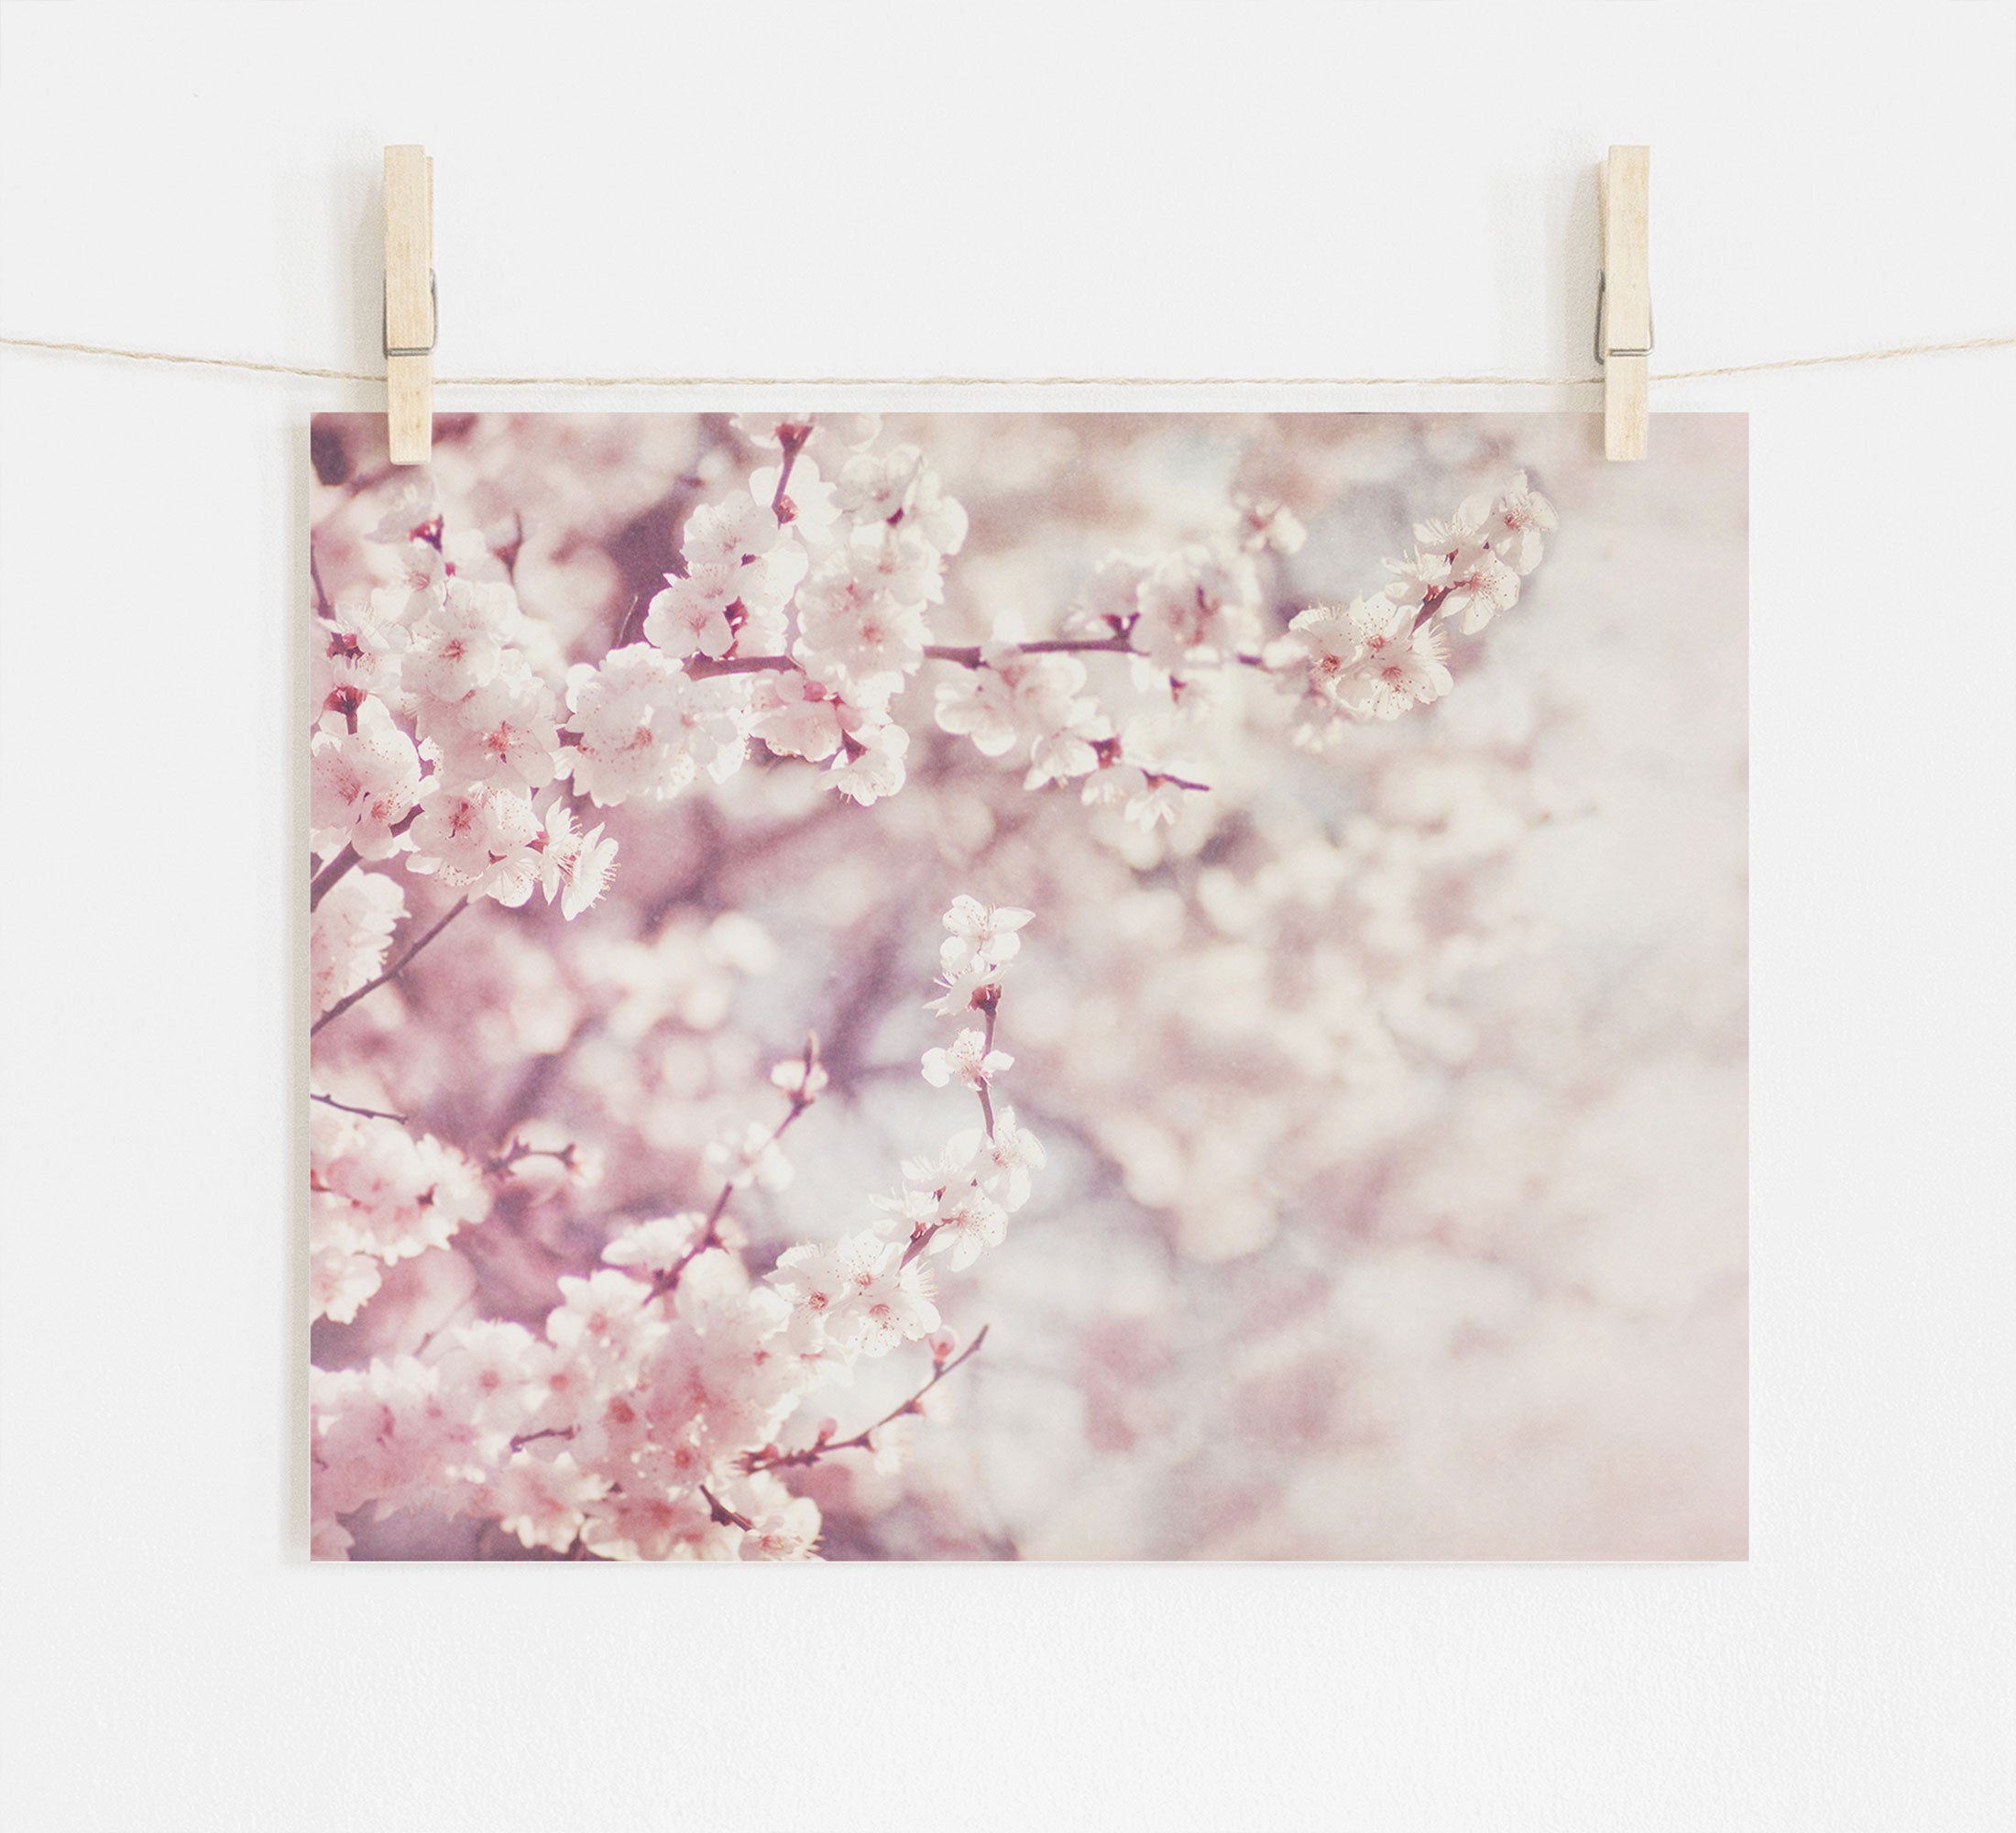 A photo of the Pink Floral Print, 'Dreamy Blossom' from Offley Green, clipped to a string with wooden clothespins, displayed against a white wall. The blossoms are in soft focus with a shabby pink and white color palette.